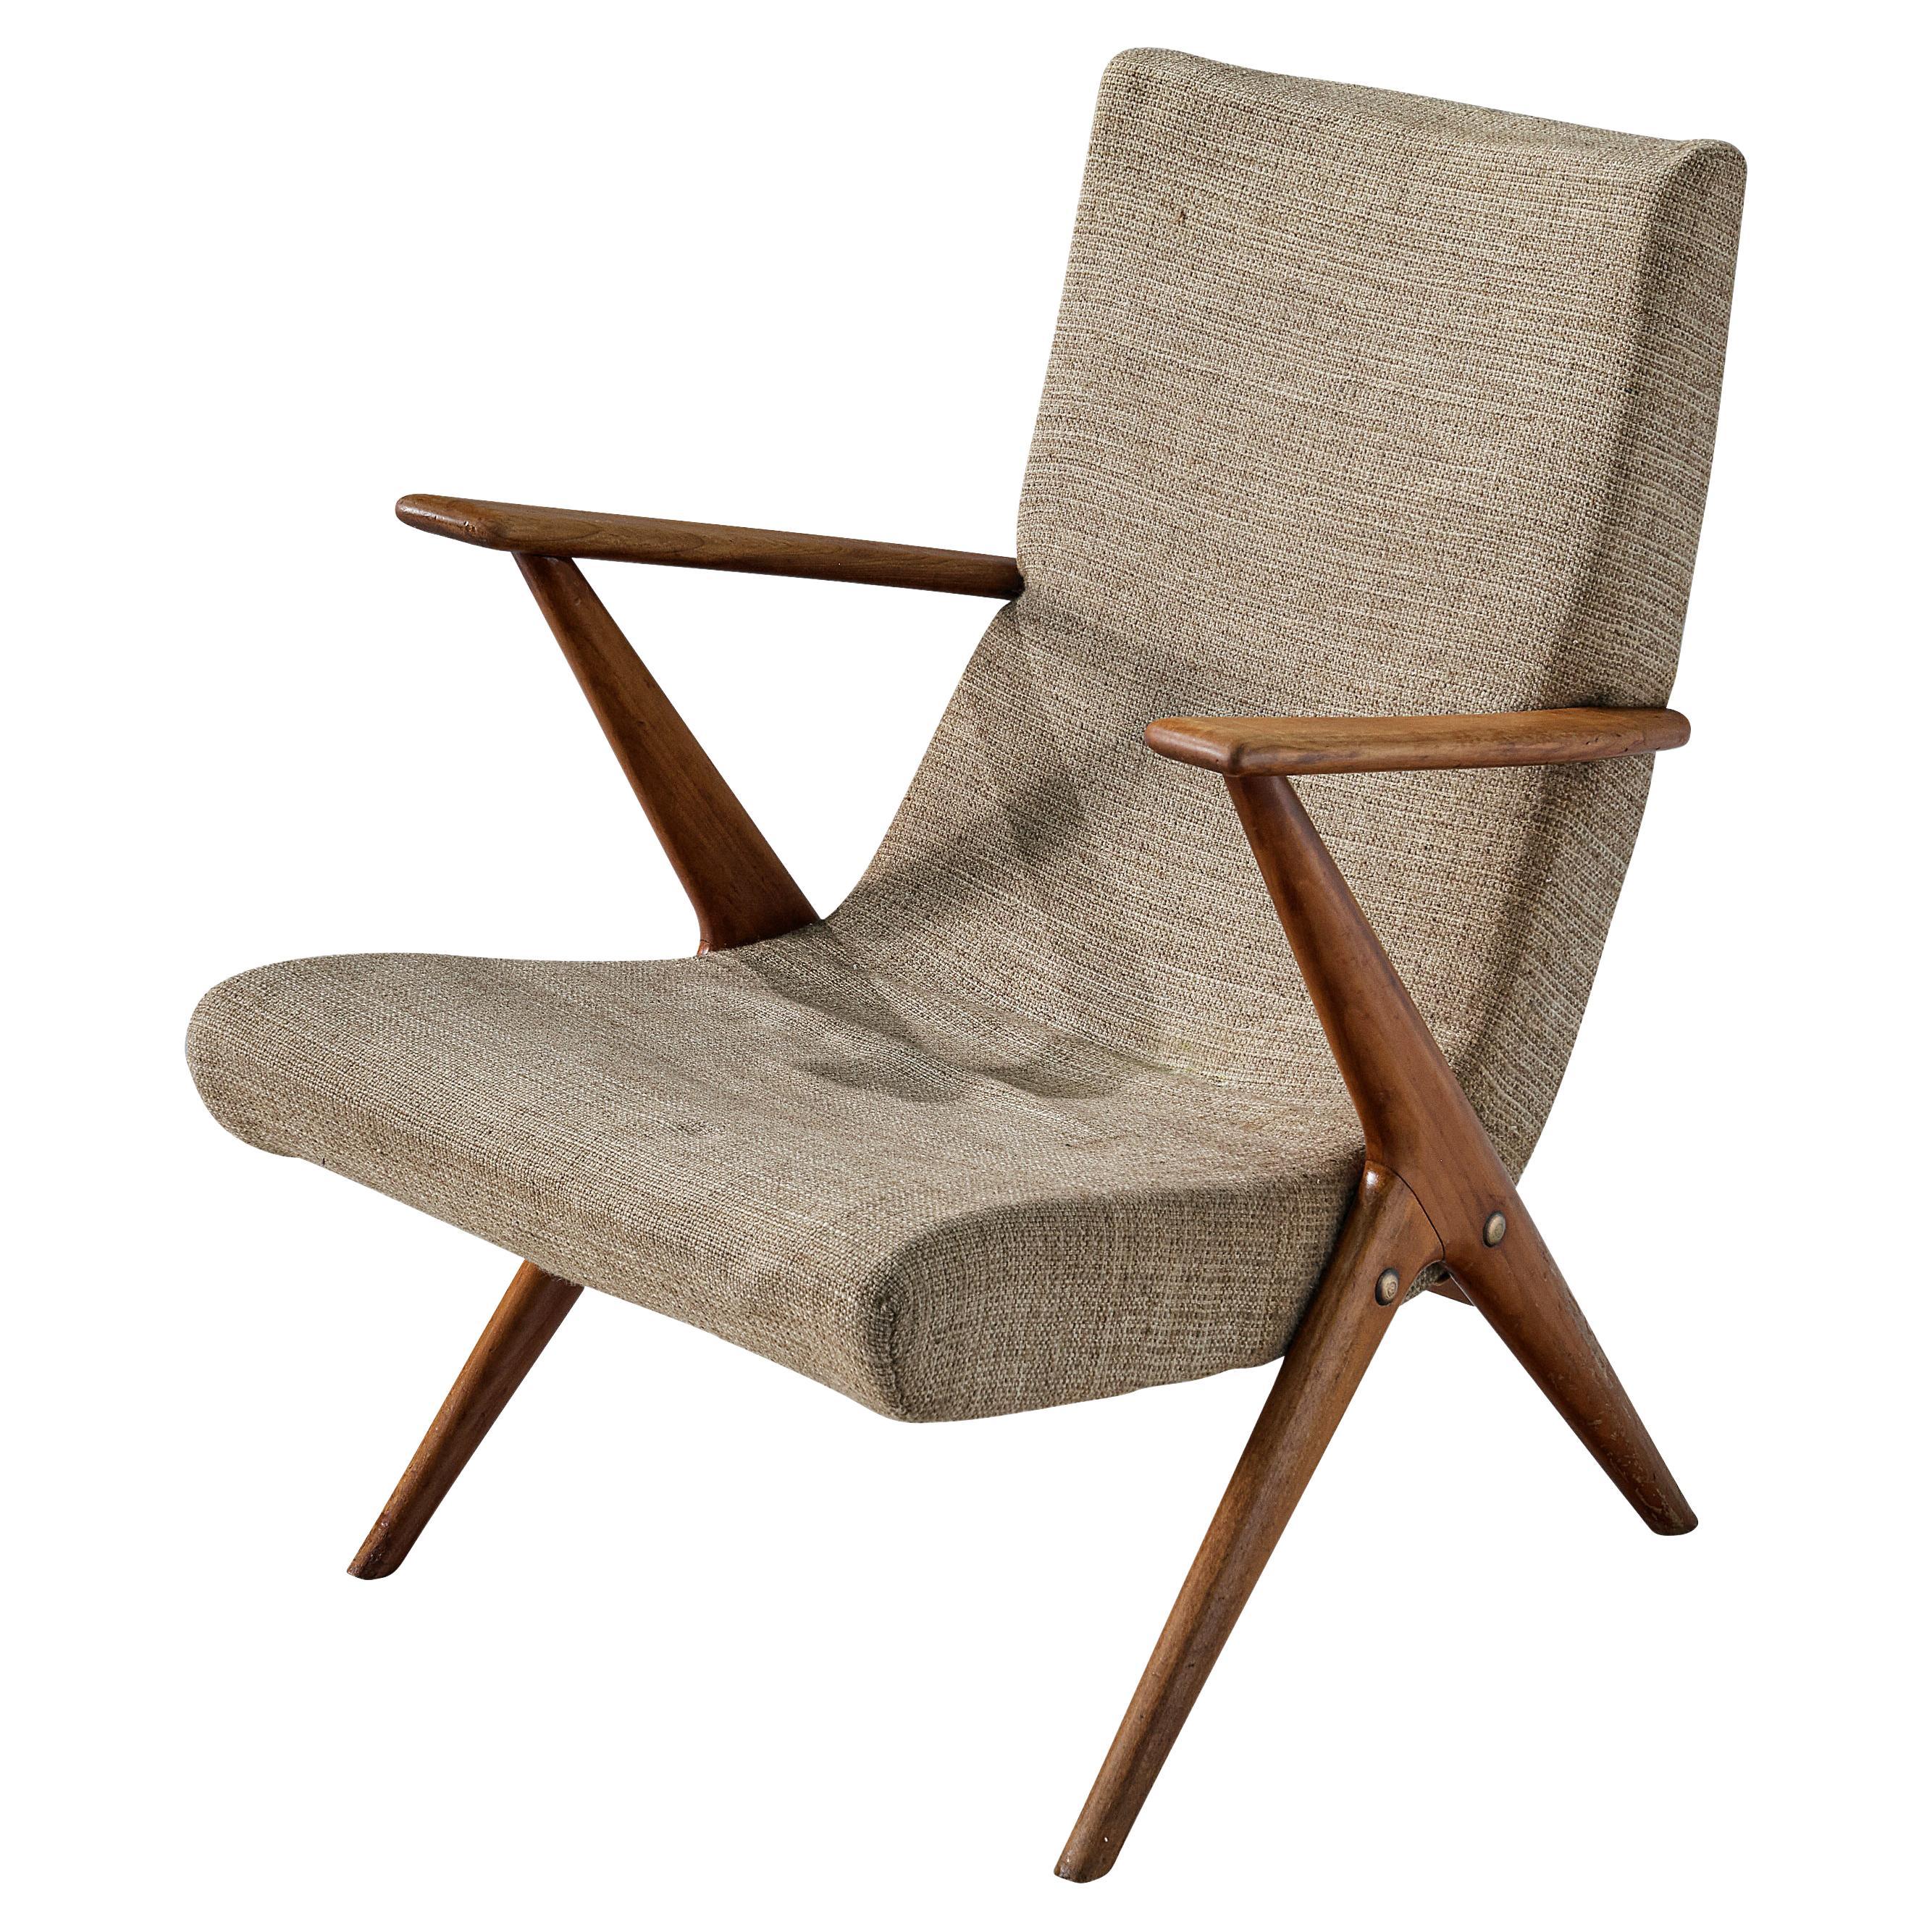 Sculptural Italian Lounge Chair in Cherry